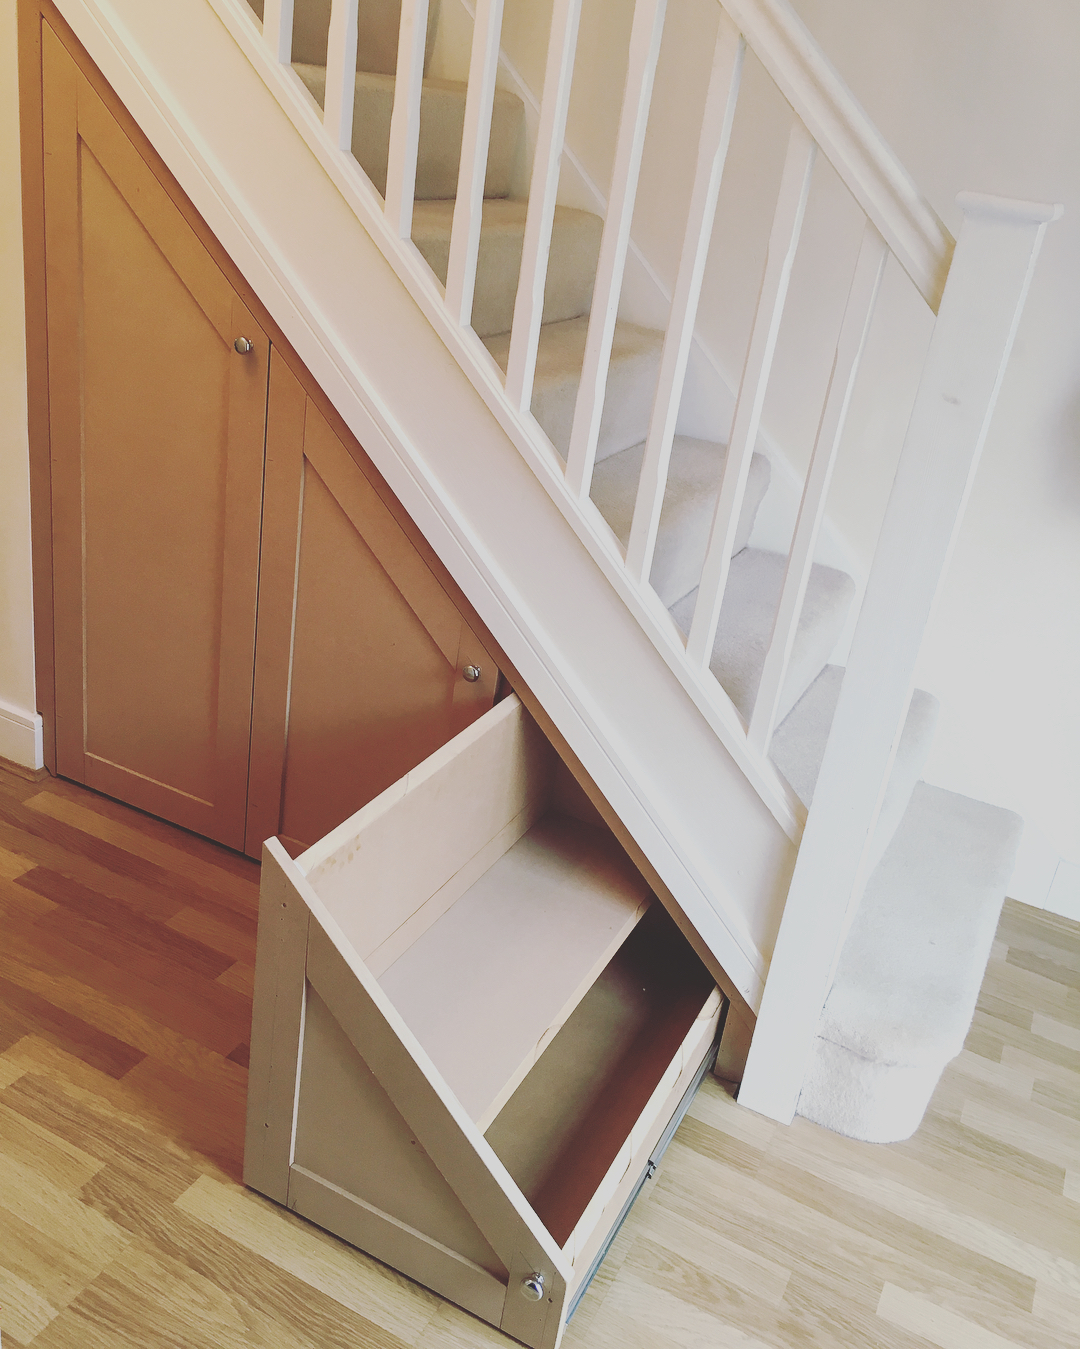 Sliding drawer added beneath stairs in the home.